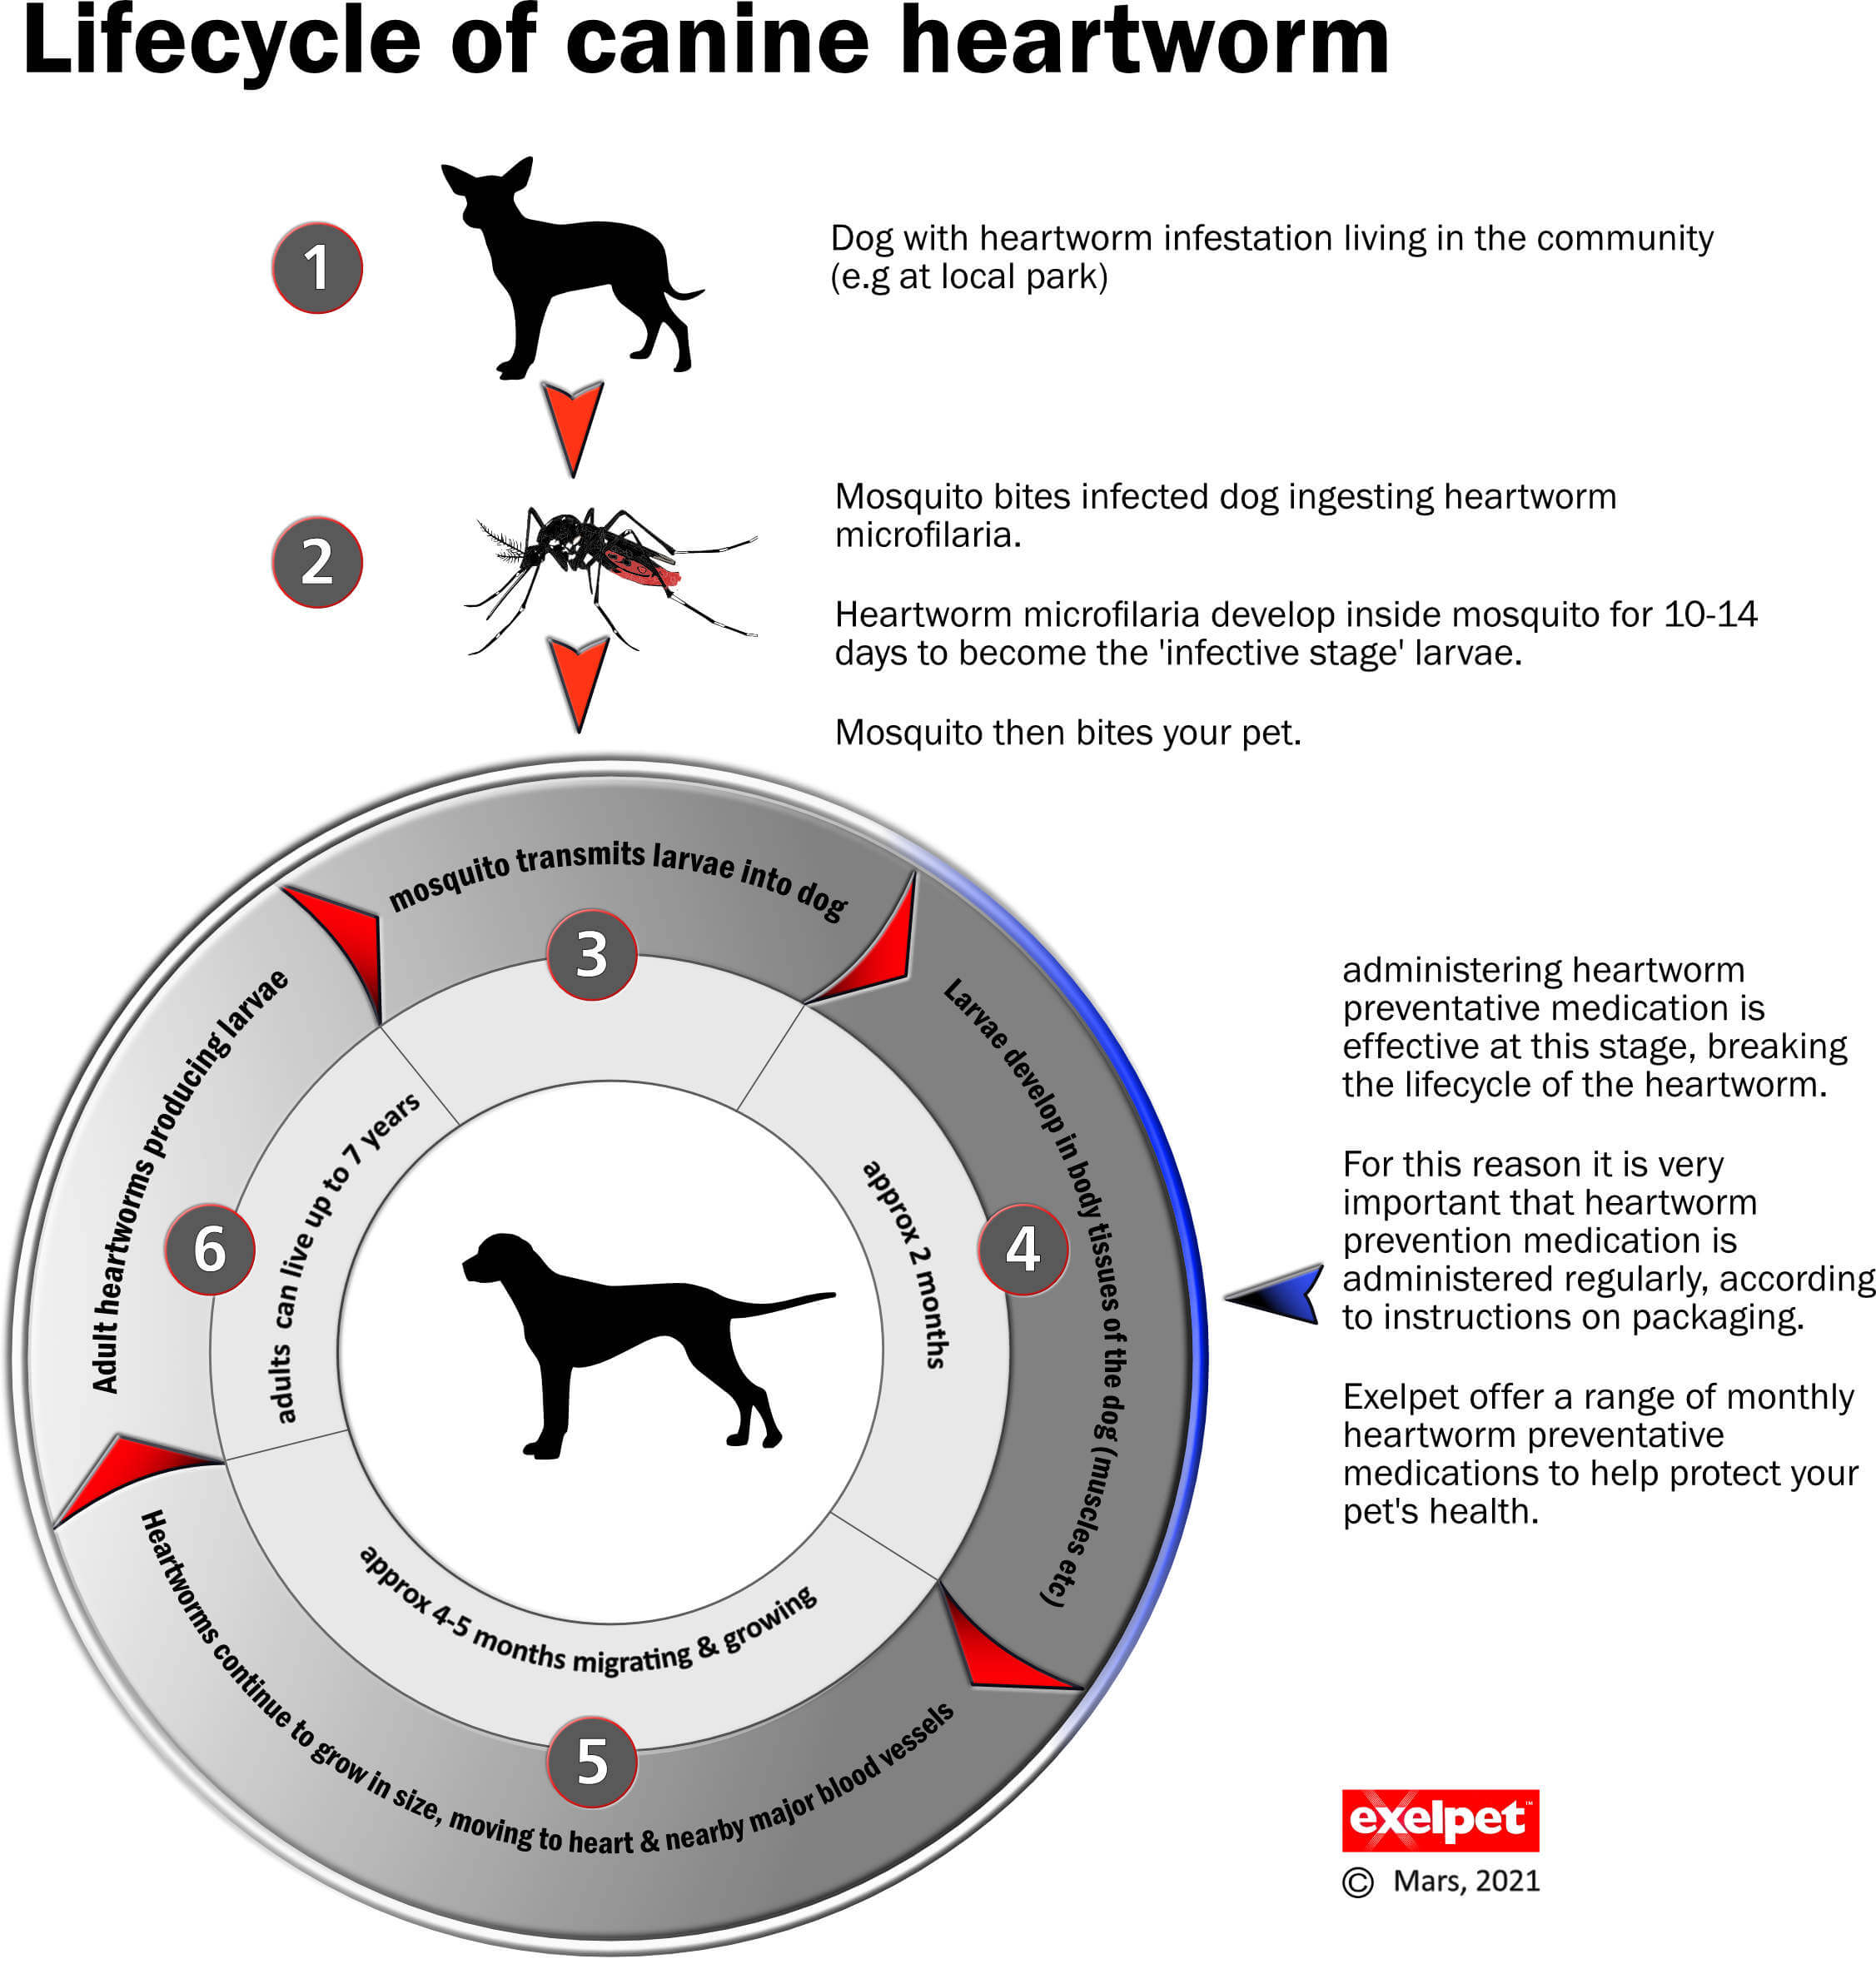 Canine heartworm